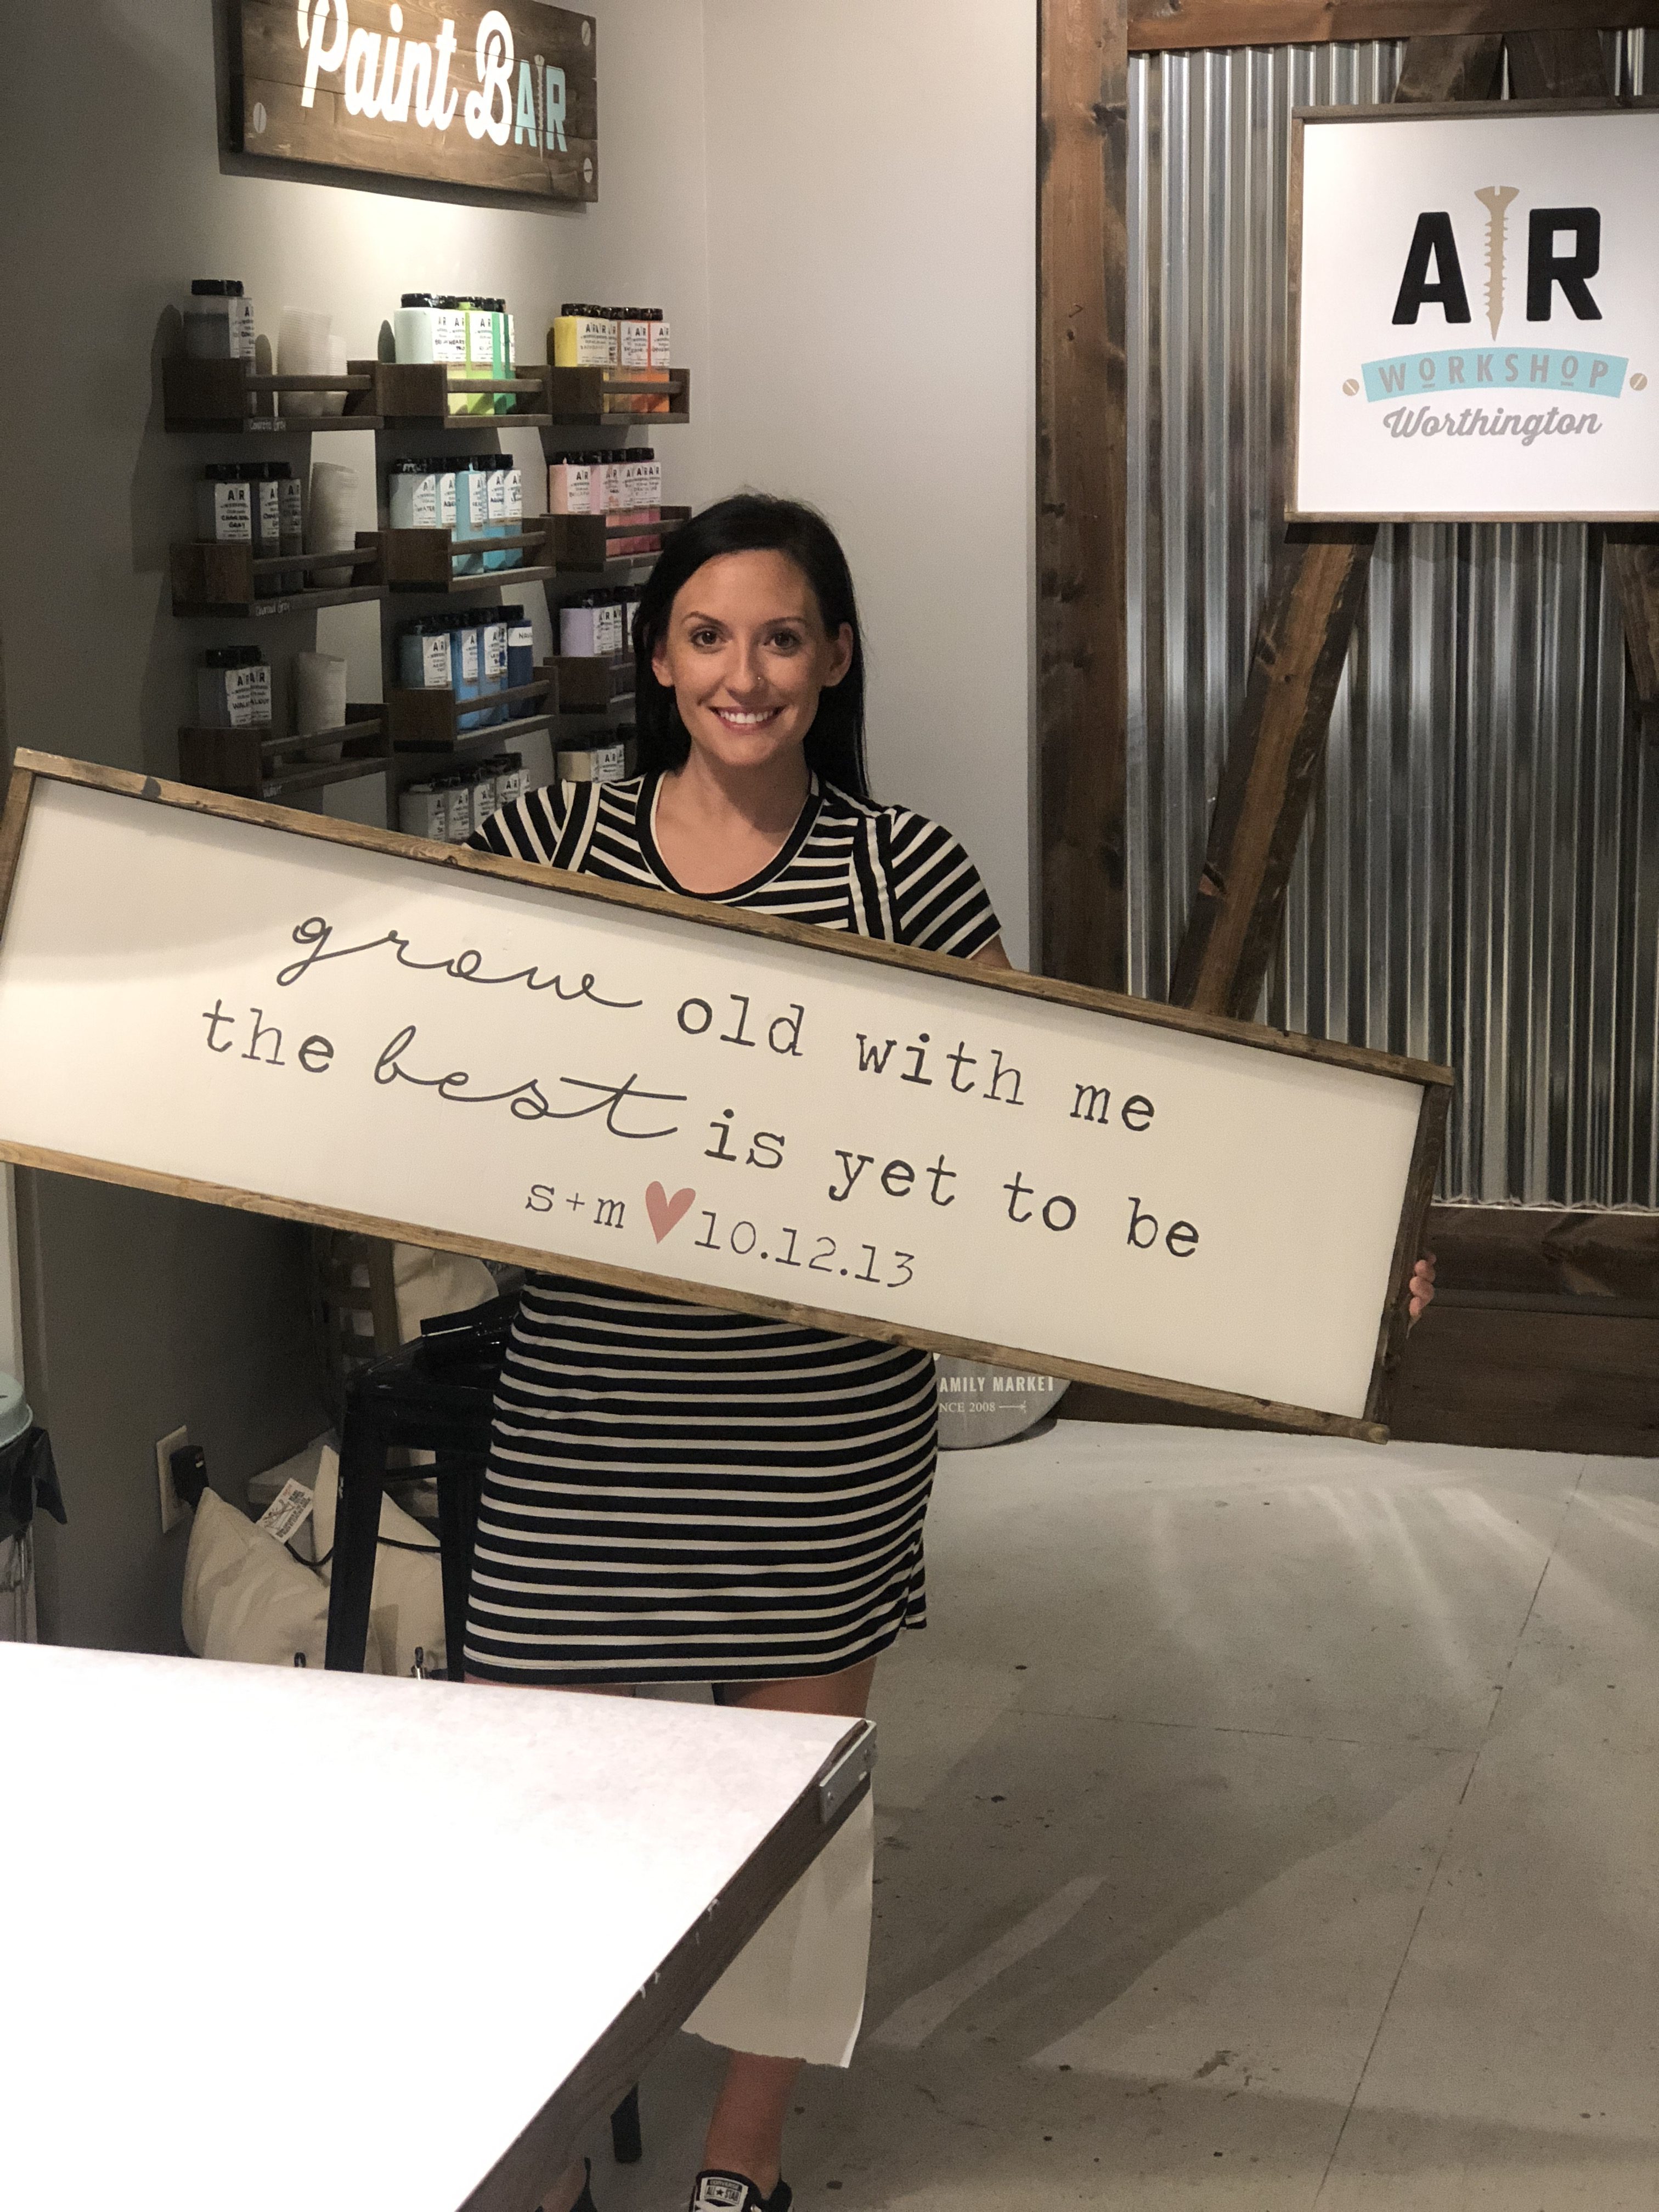 DIY Date Night: Our Experience at AR Workshop Worthington